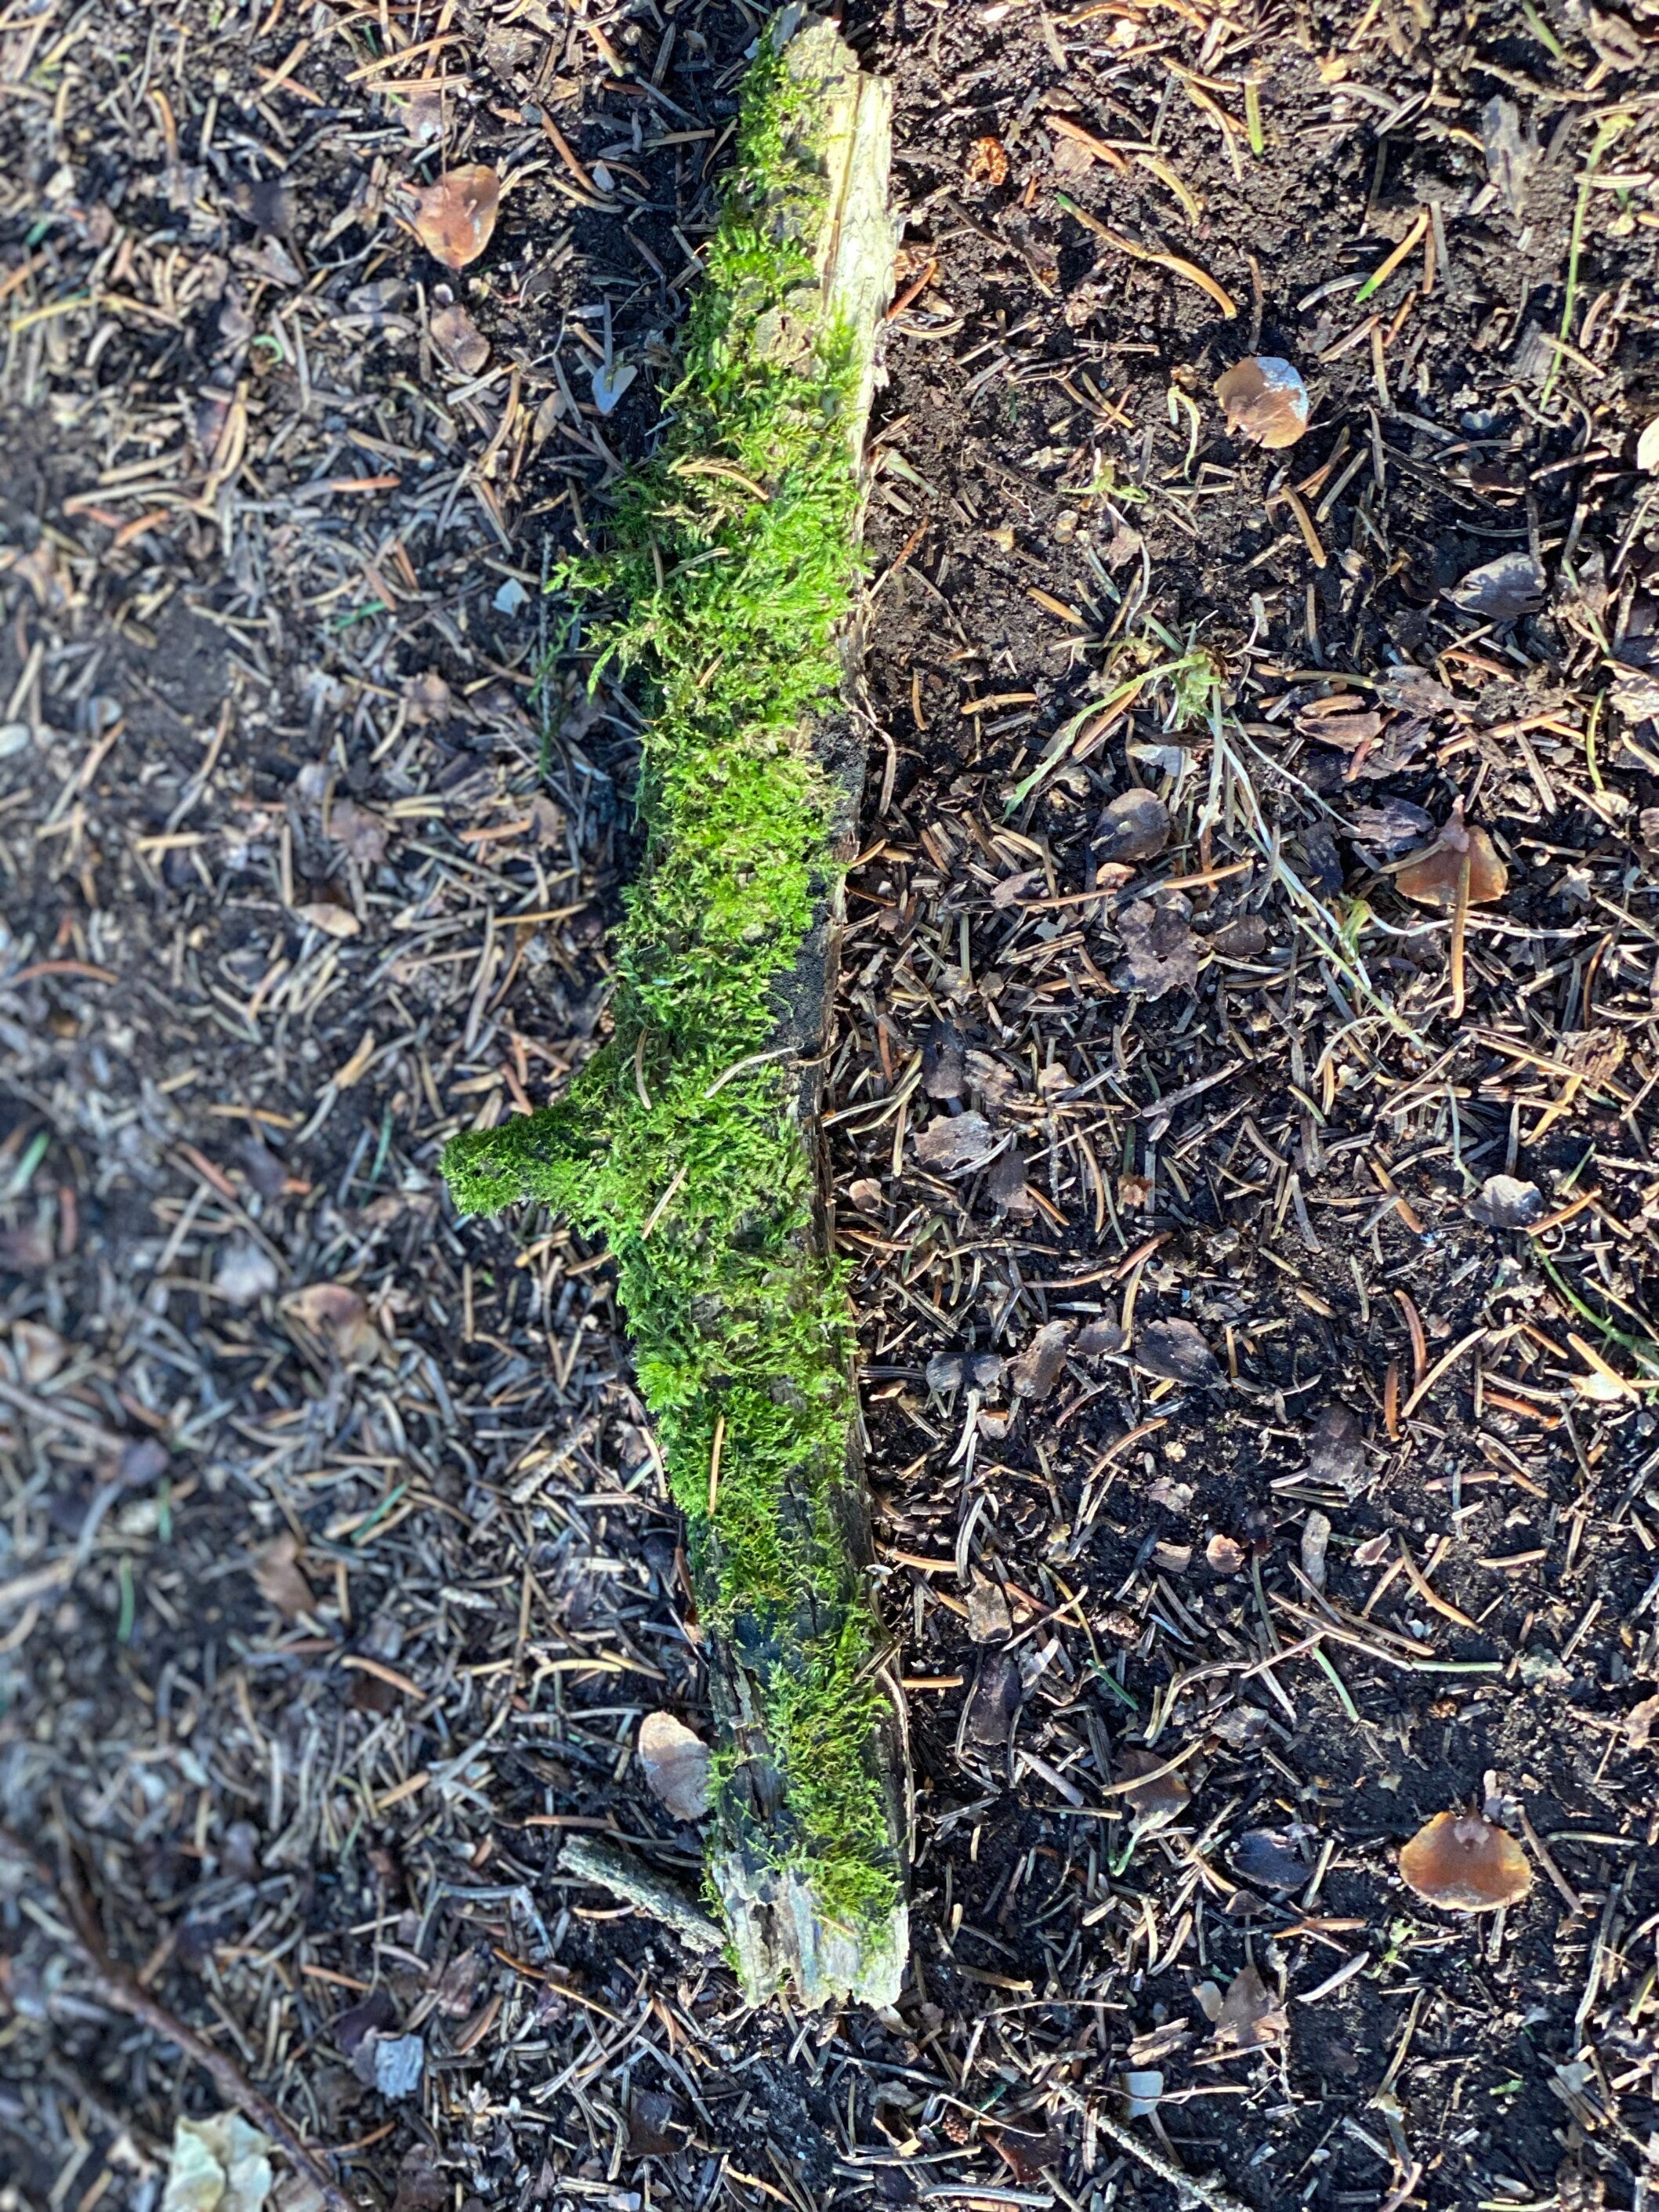 Live Moss Stick, Mossy Stick Approximately 11 Inches Long x 1 Inch Wide x About 1 Inch High